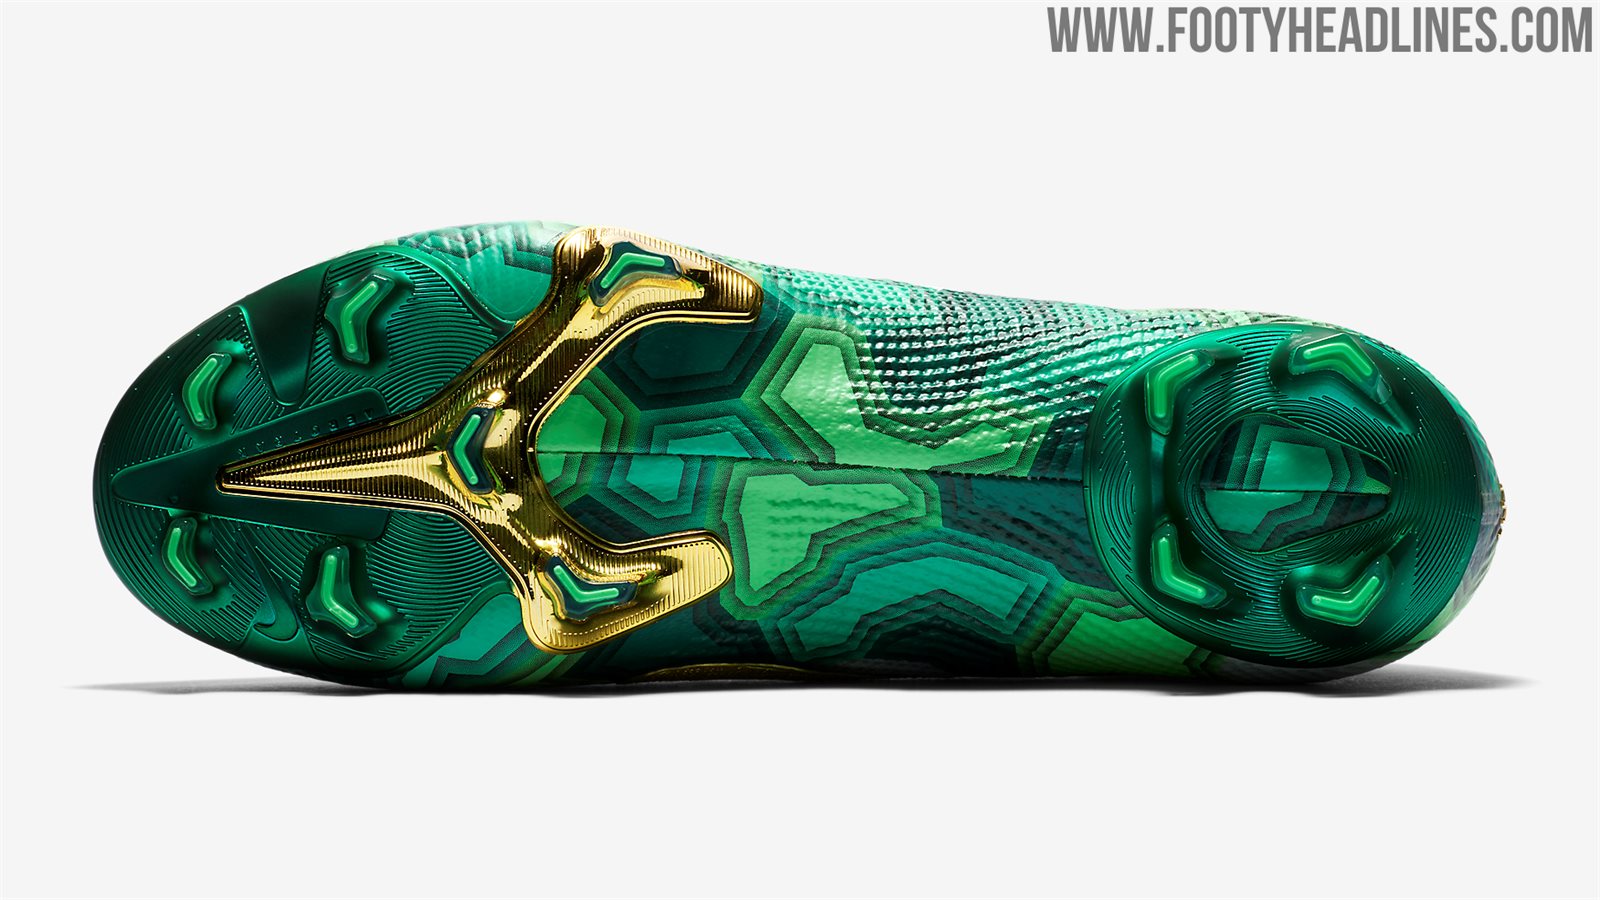 Nike Mercurial Superfly Mbappe 'Bondy Dreams' Boots Released - First ...